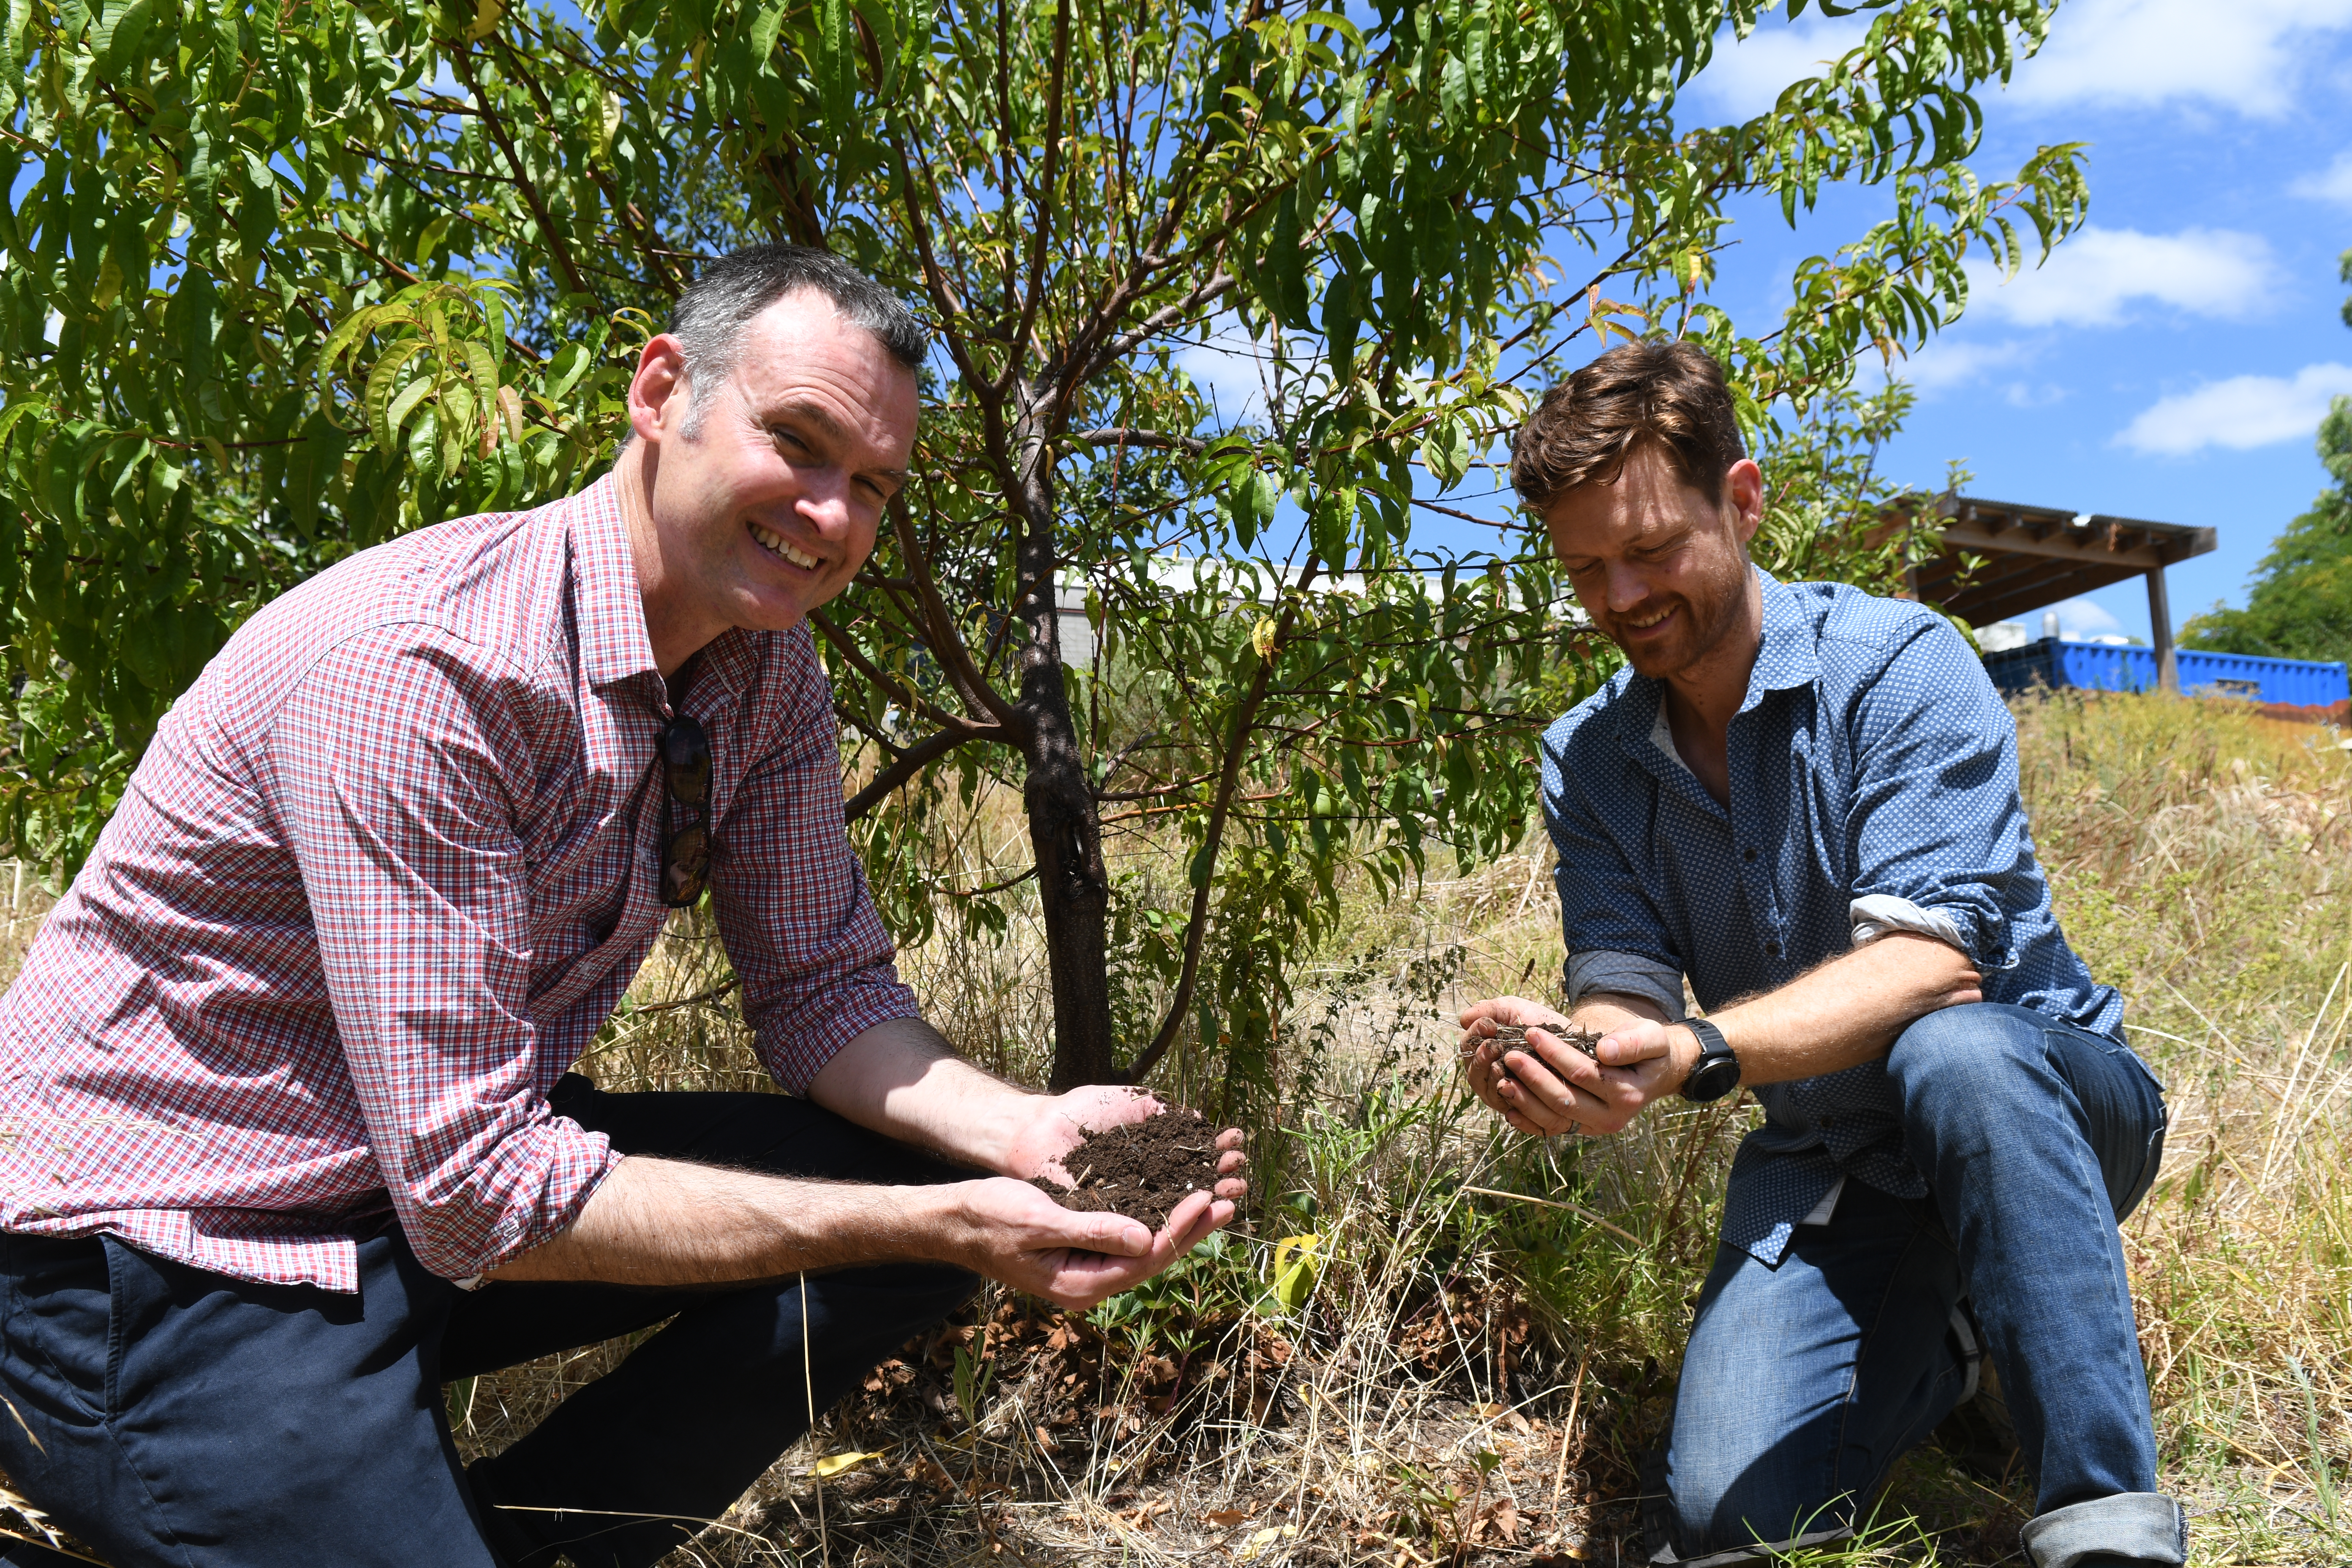 Dr Craig Liddicoat, left, and Associate Professor Martin Breed with one of the edible gardens established for students and staff at Flinders University’s Bedford Park campus in Adelaide, South Australia. 